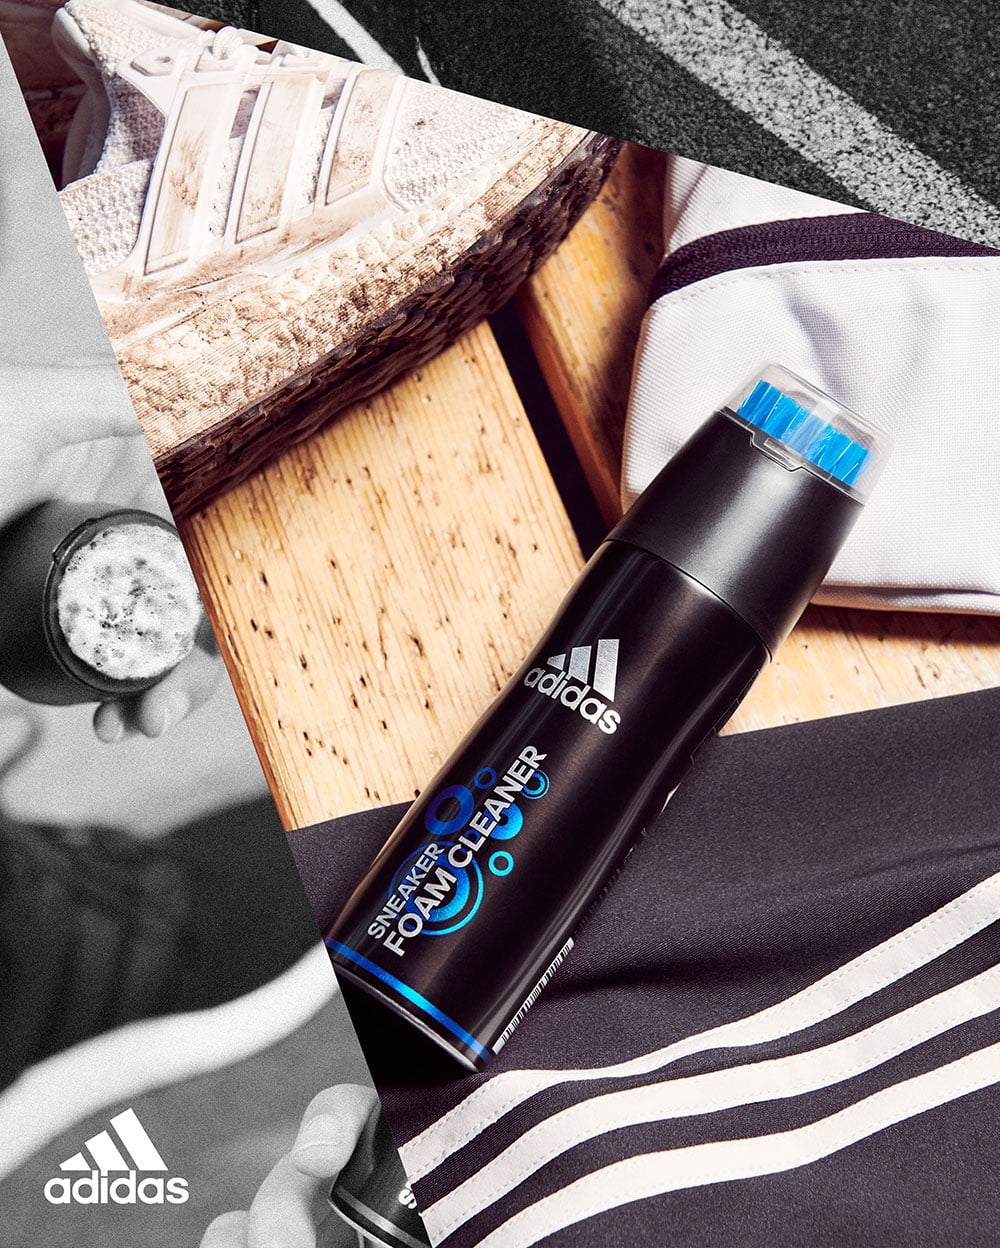 adidas Shoe Cleaner Spray-Instant Foam Sneaker Cleaner Easy-to-use Lid Brush Walmart.com